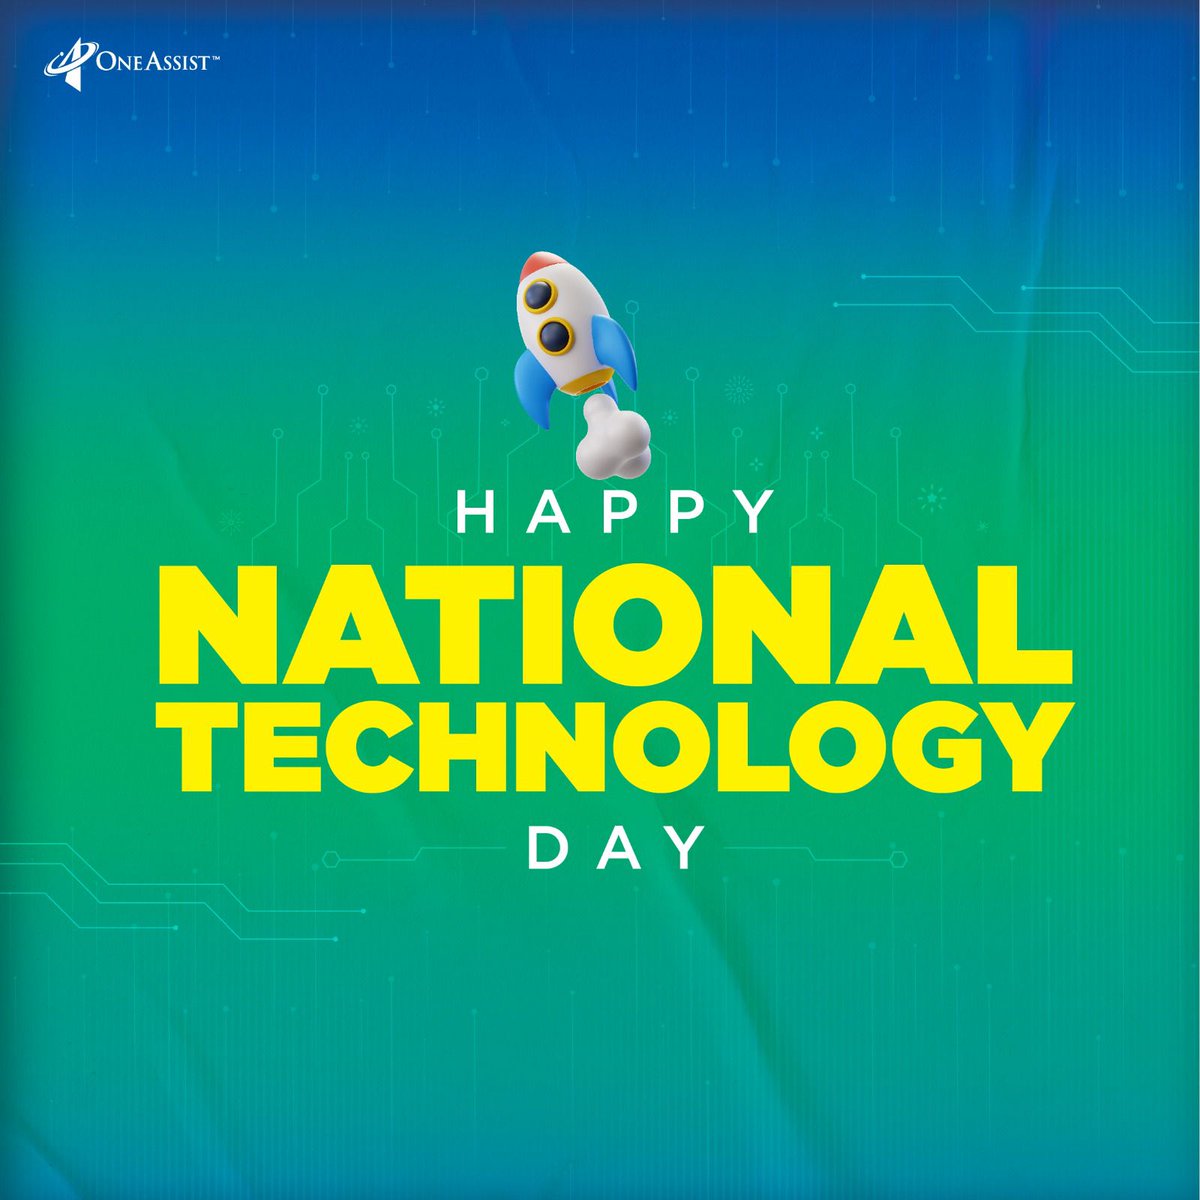 #technologyday #tech #India #wishes #latest #gadgets #sonic #sales #portal #oneassist #oneassistfamily #protectionplanning #assistance #WithLoveForOneAssist